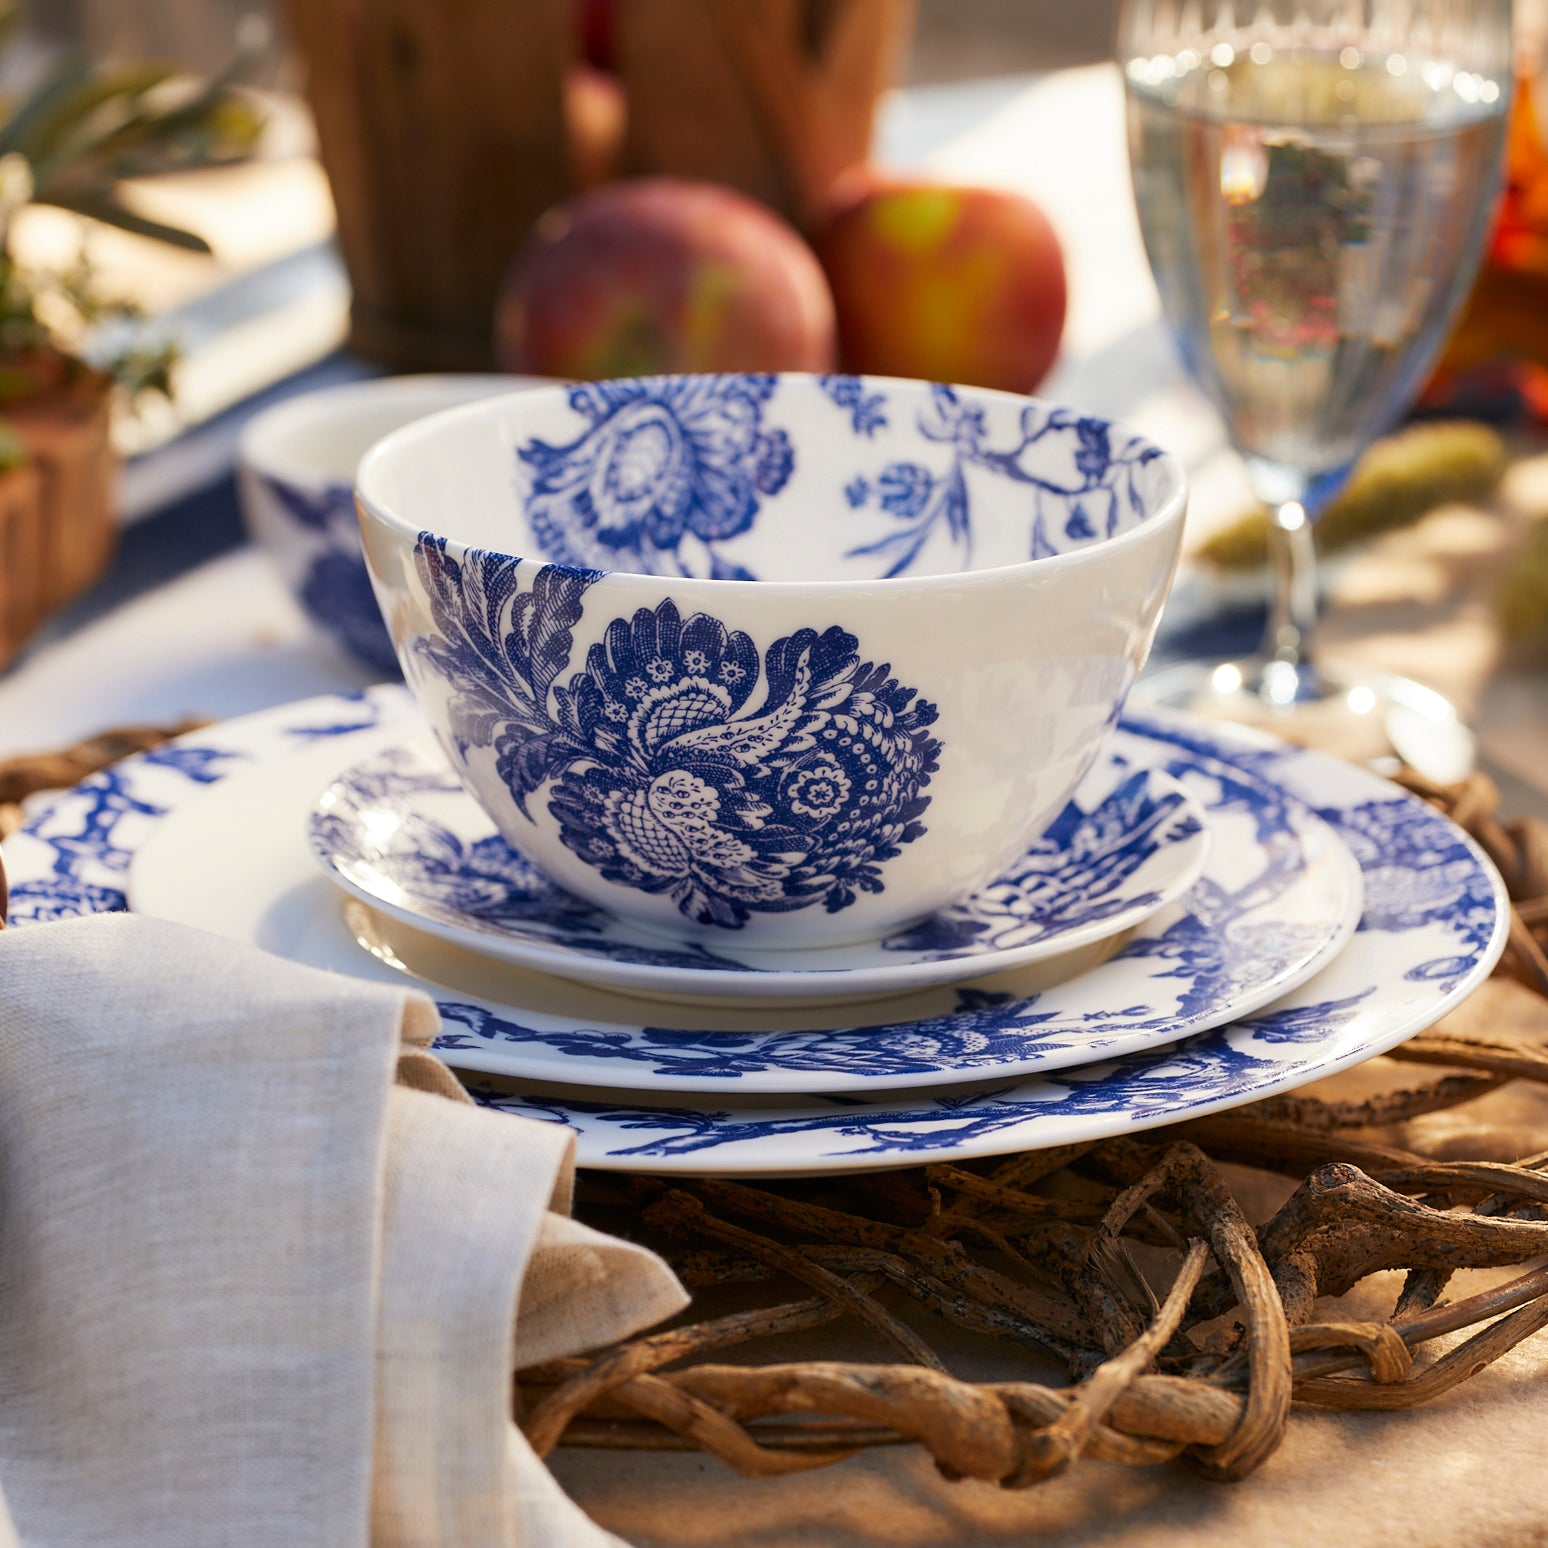 Introducing the Arcadia porcelain dinnerware collection, featuring the Caskata Arcadia Cereal Bowl with a delicate blue floral and tree branch pattern inspired by the Williamsburg Foundation's timeless designs.